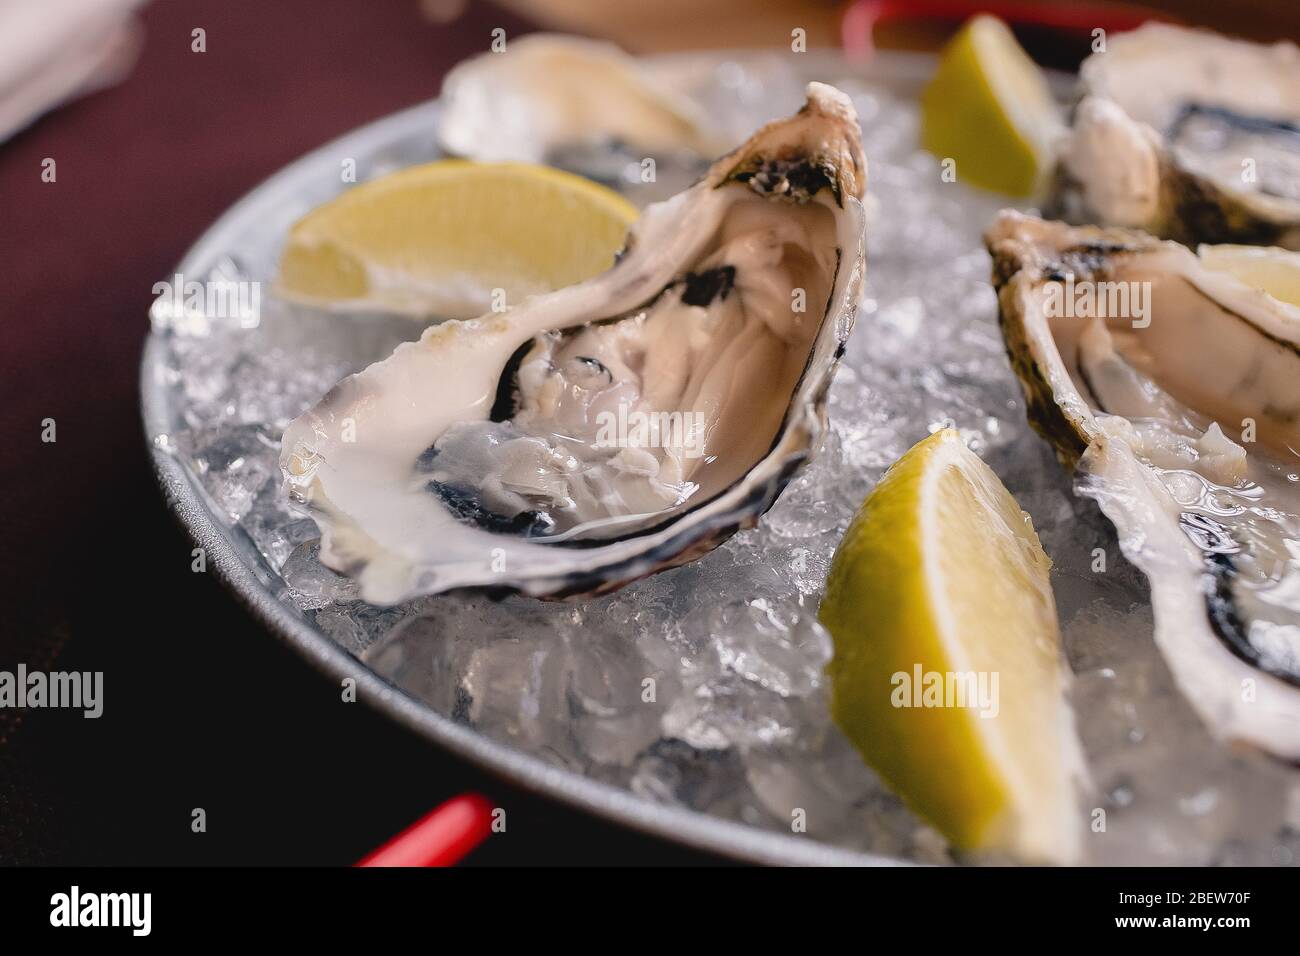 Plate with oysters, lemon and ice Stock Photo